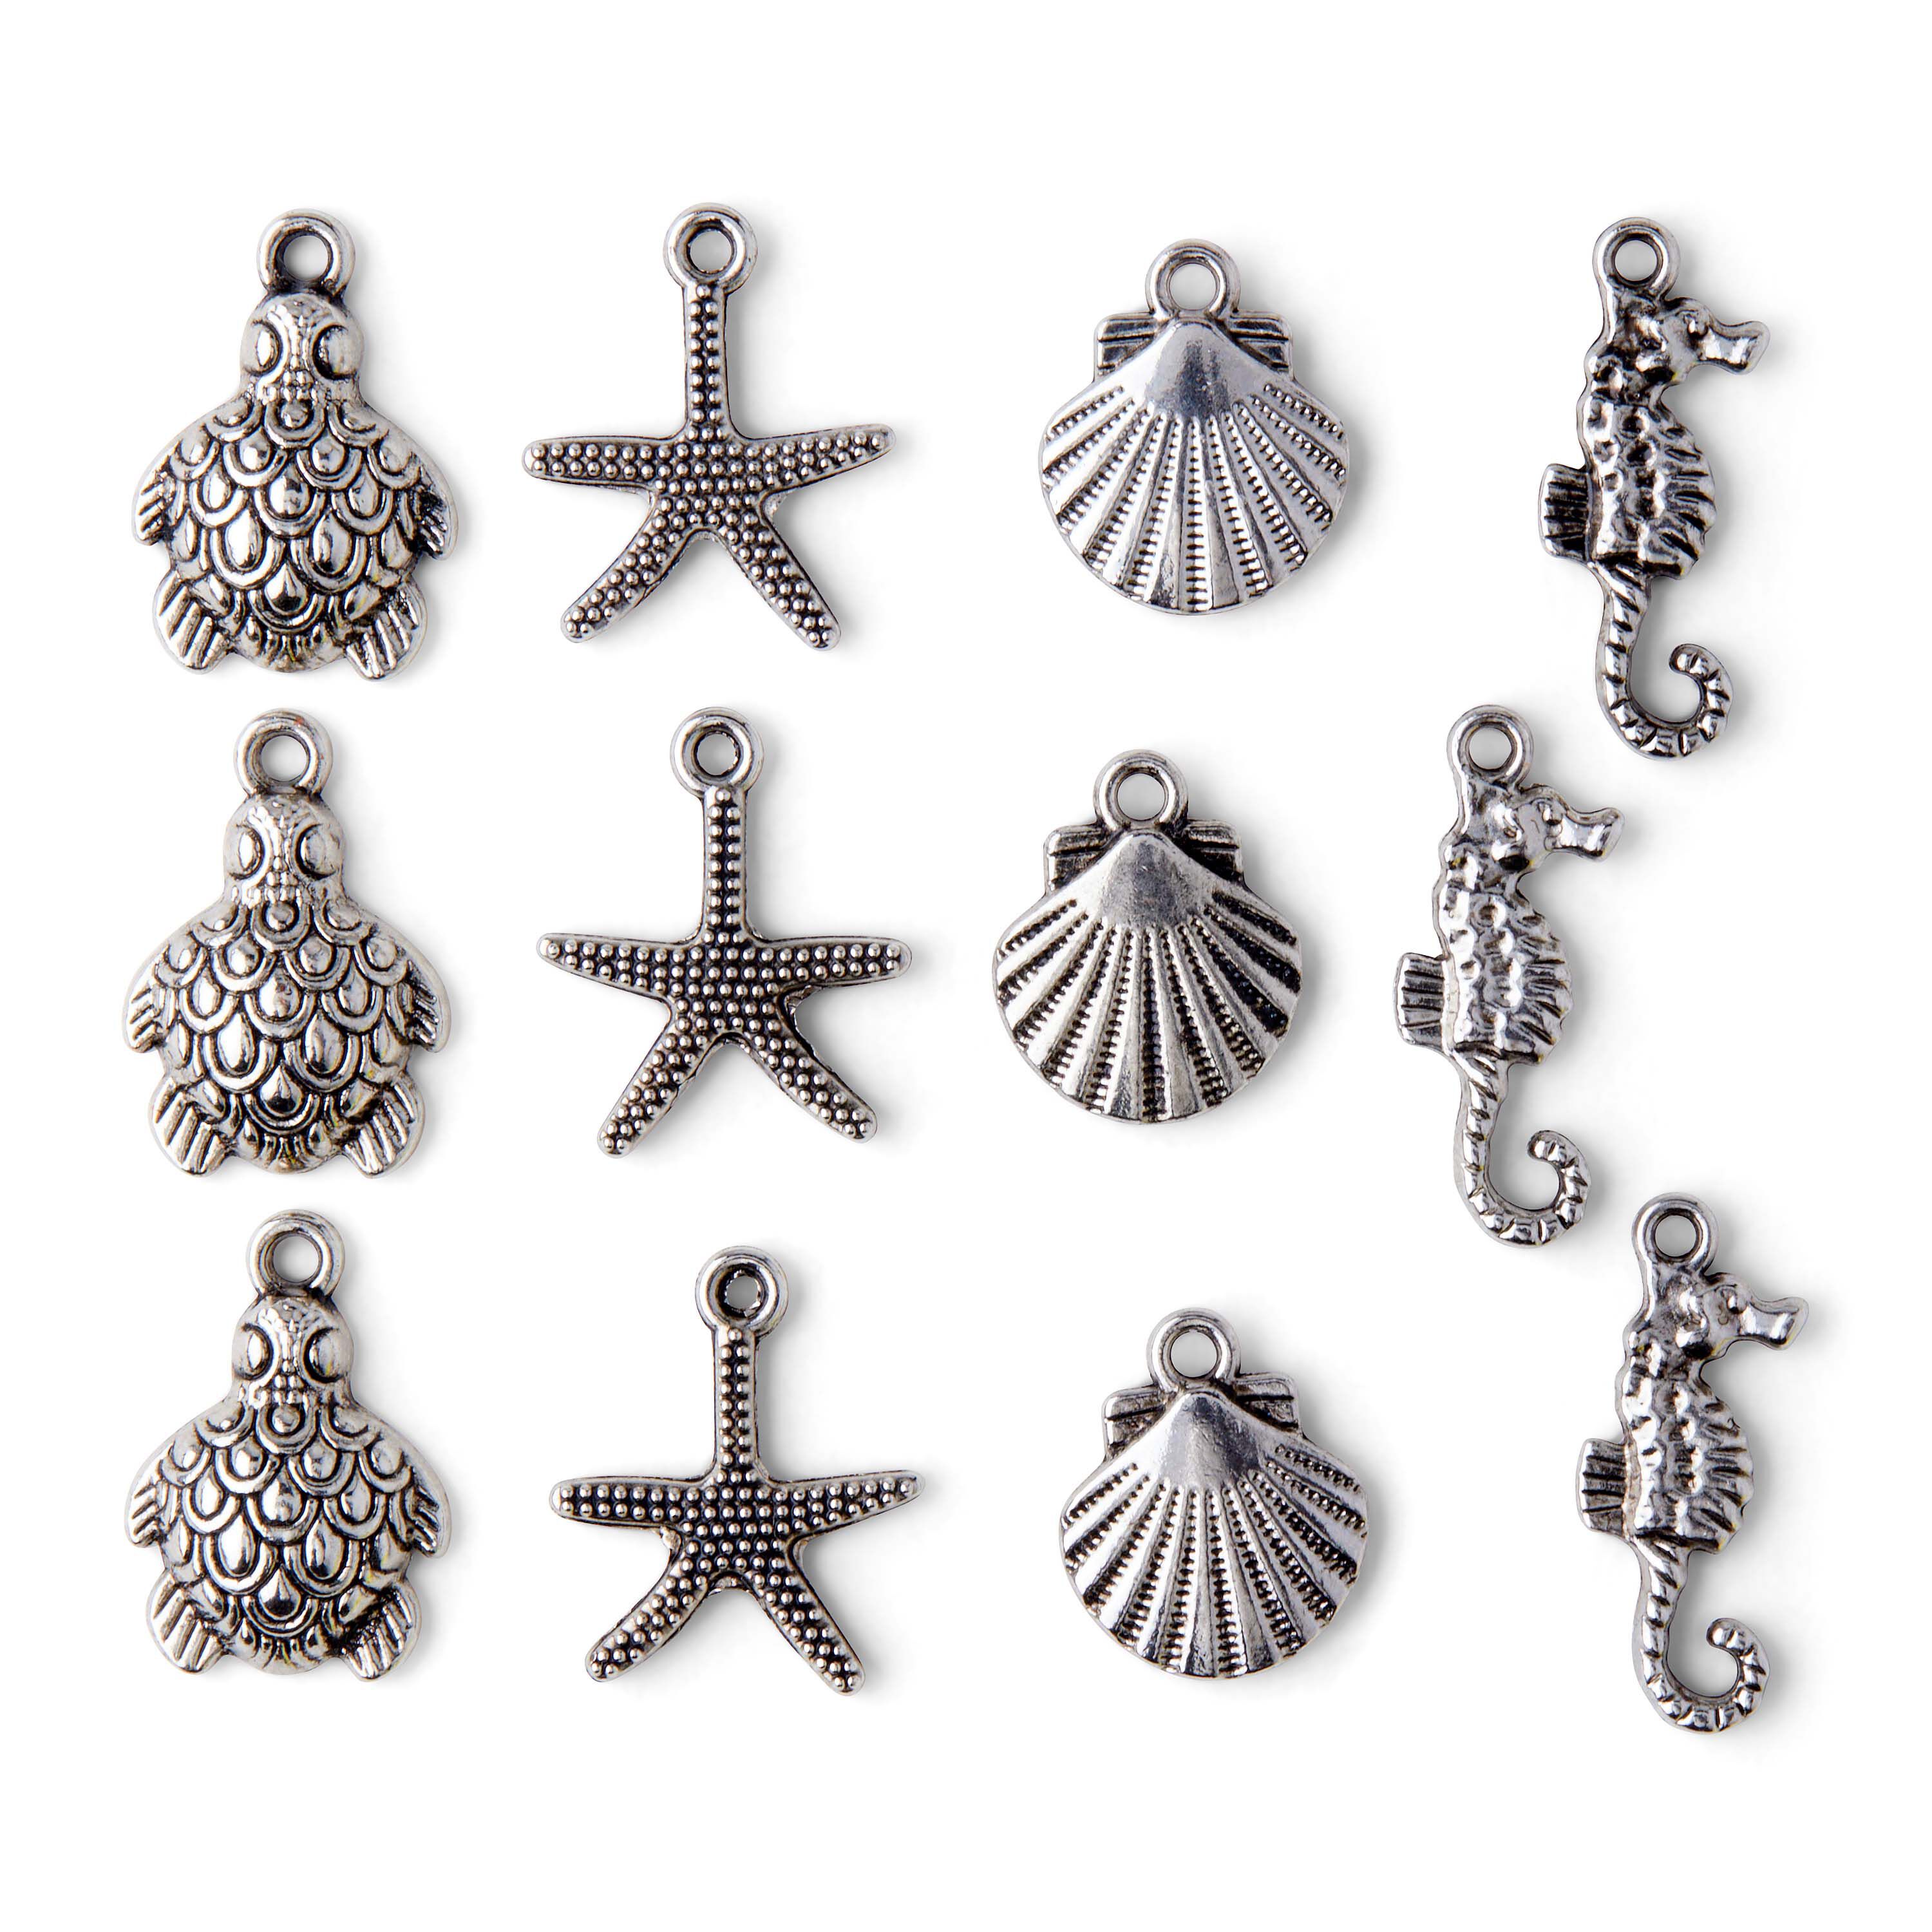 12ct Silver Sea Life Charms by hildie & jo | JOANN